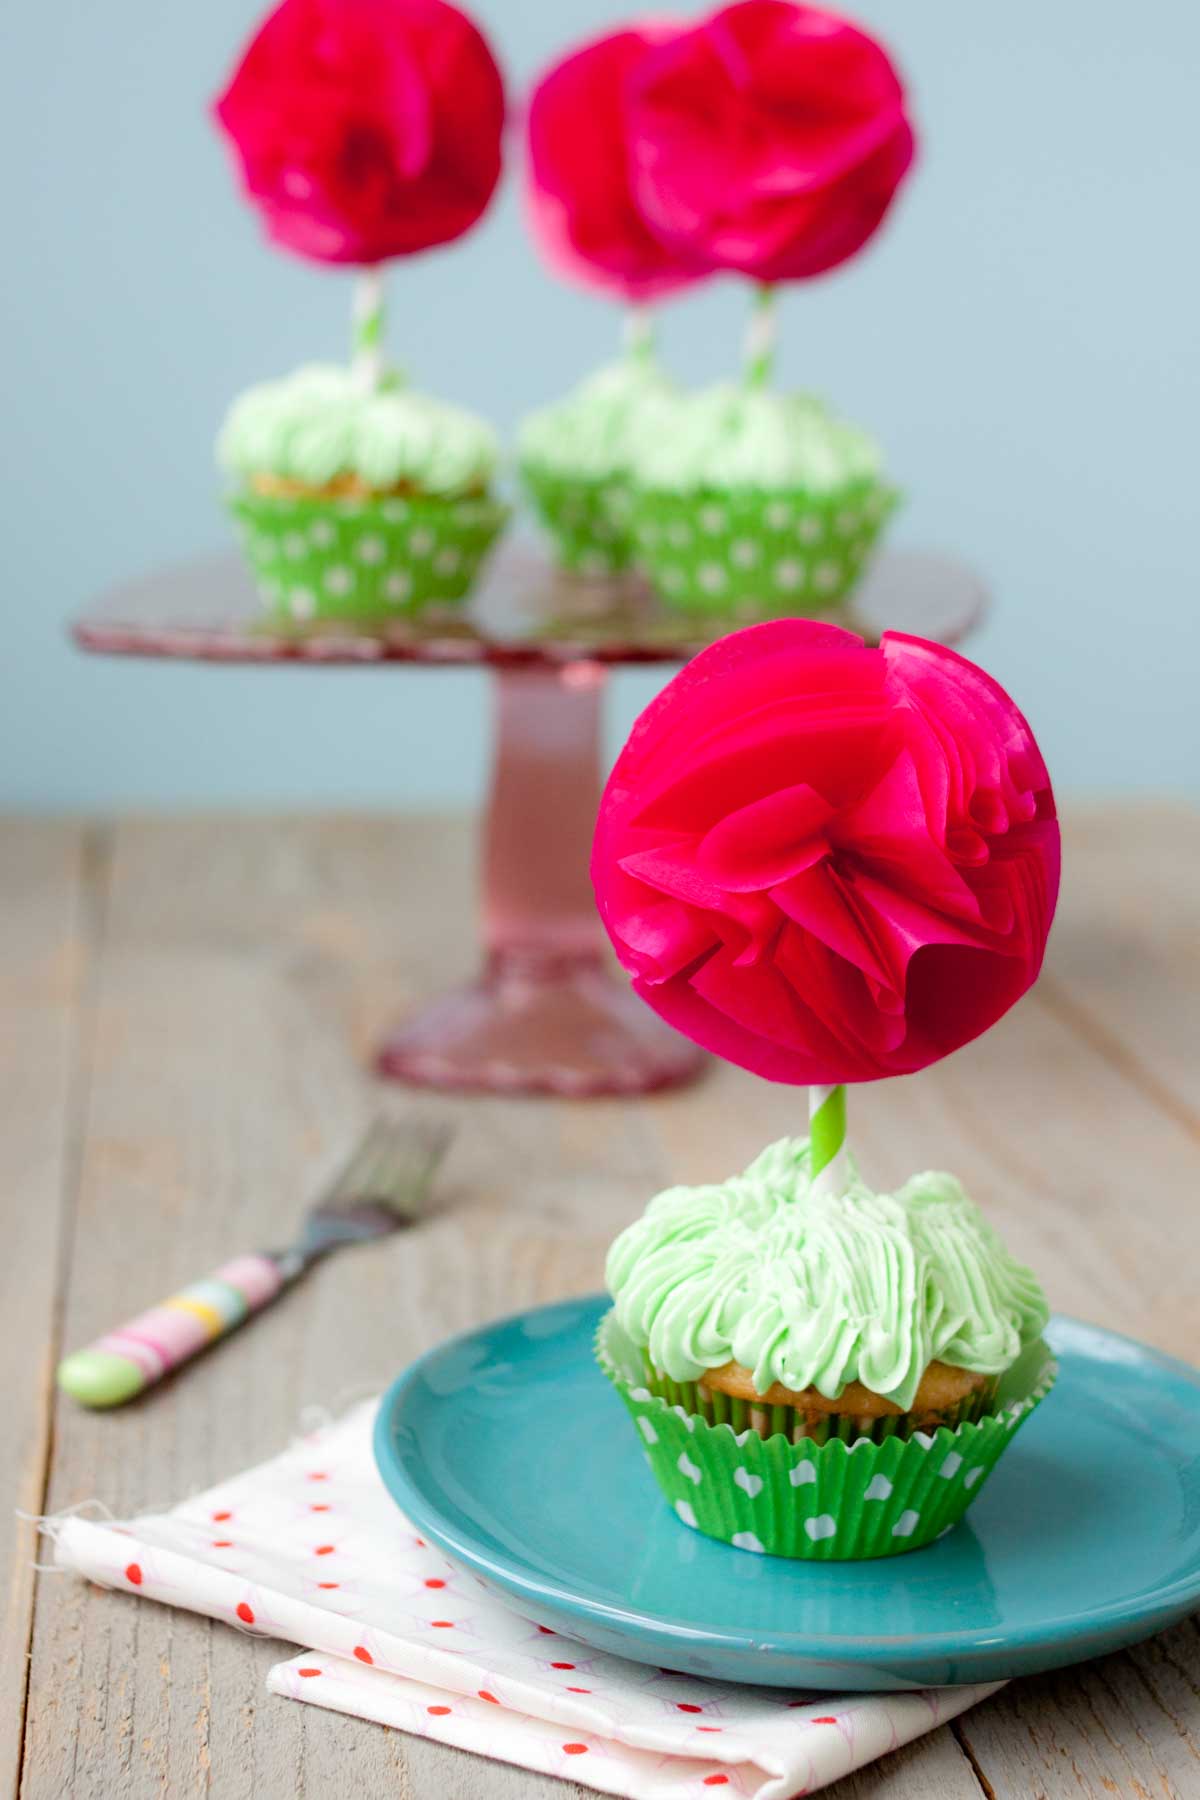 The Swiss meringue buttercream has been used on a batch of cupcakes with hot pink flower toppers.